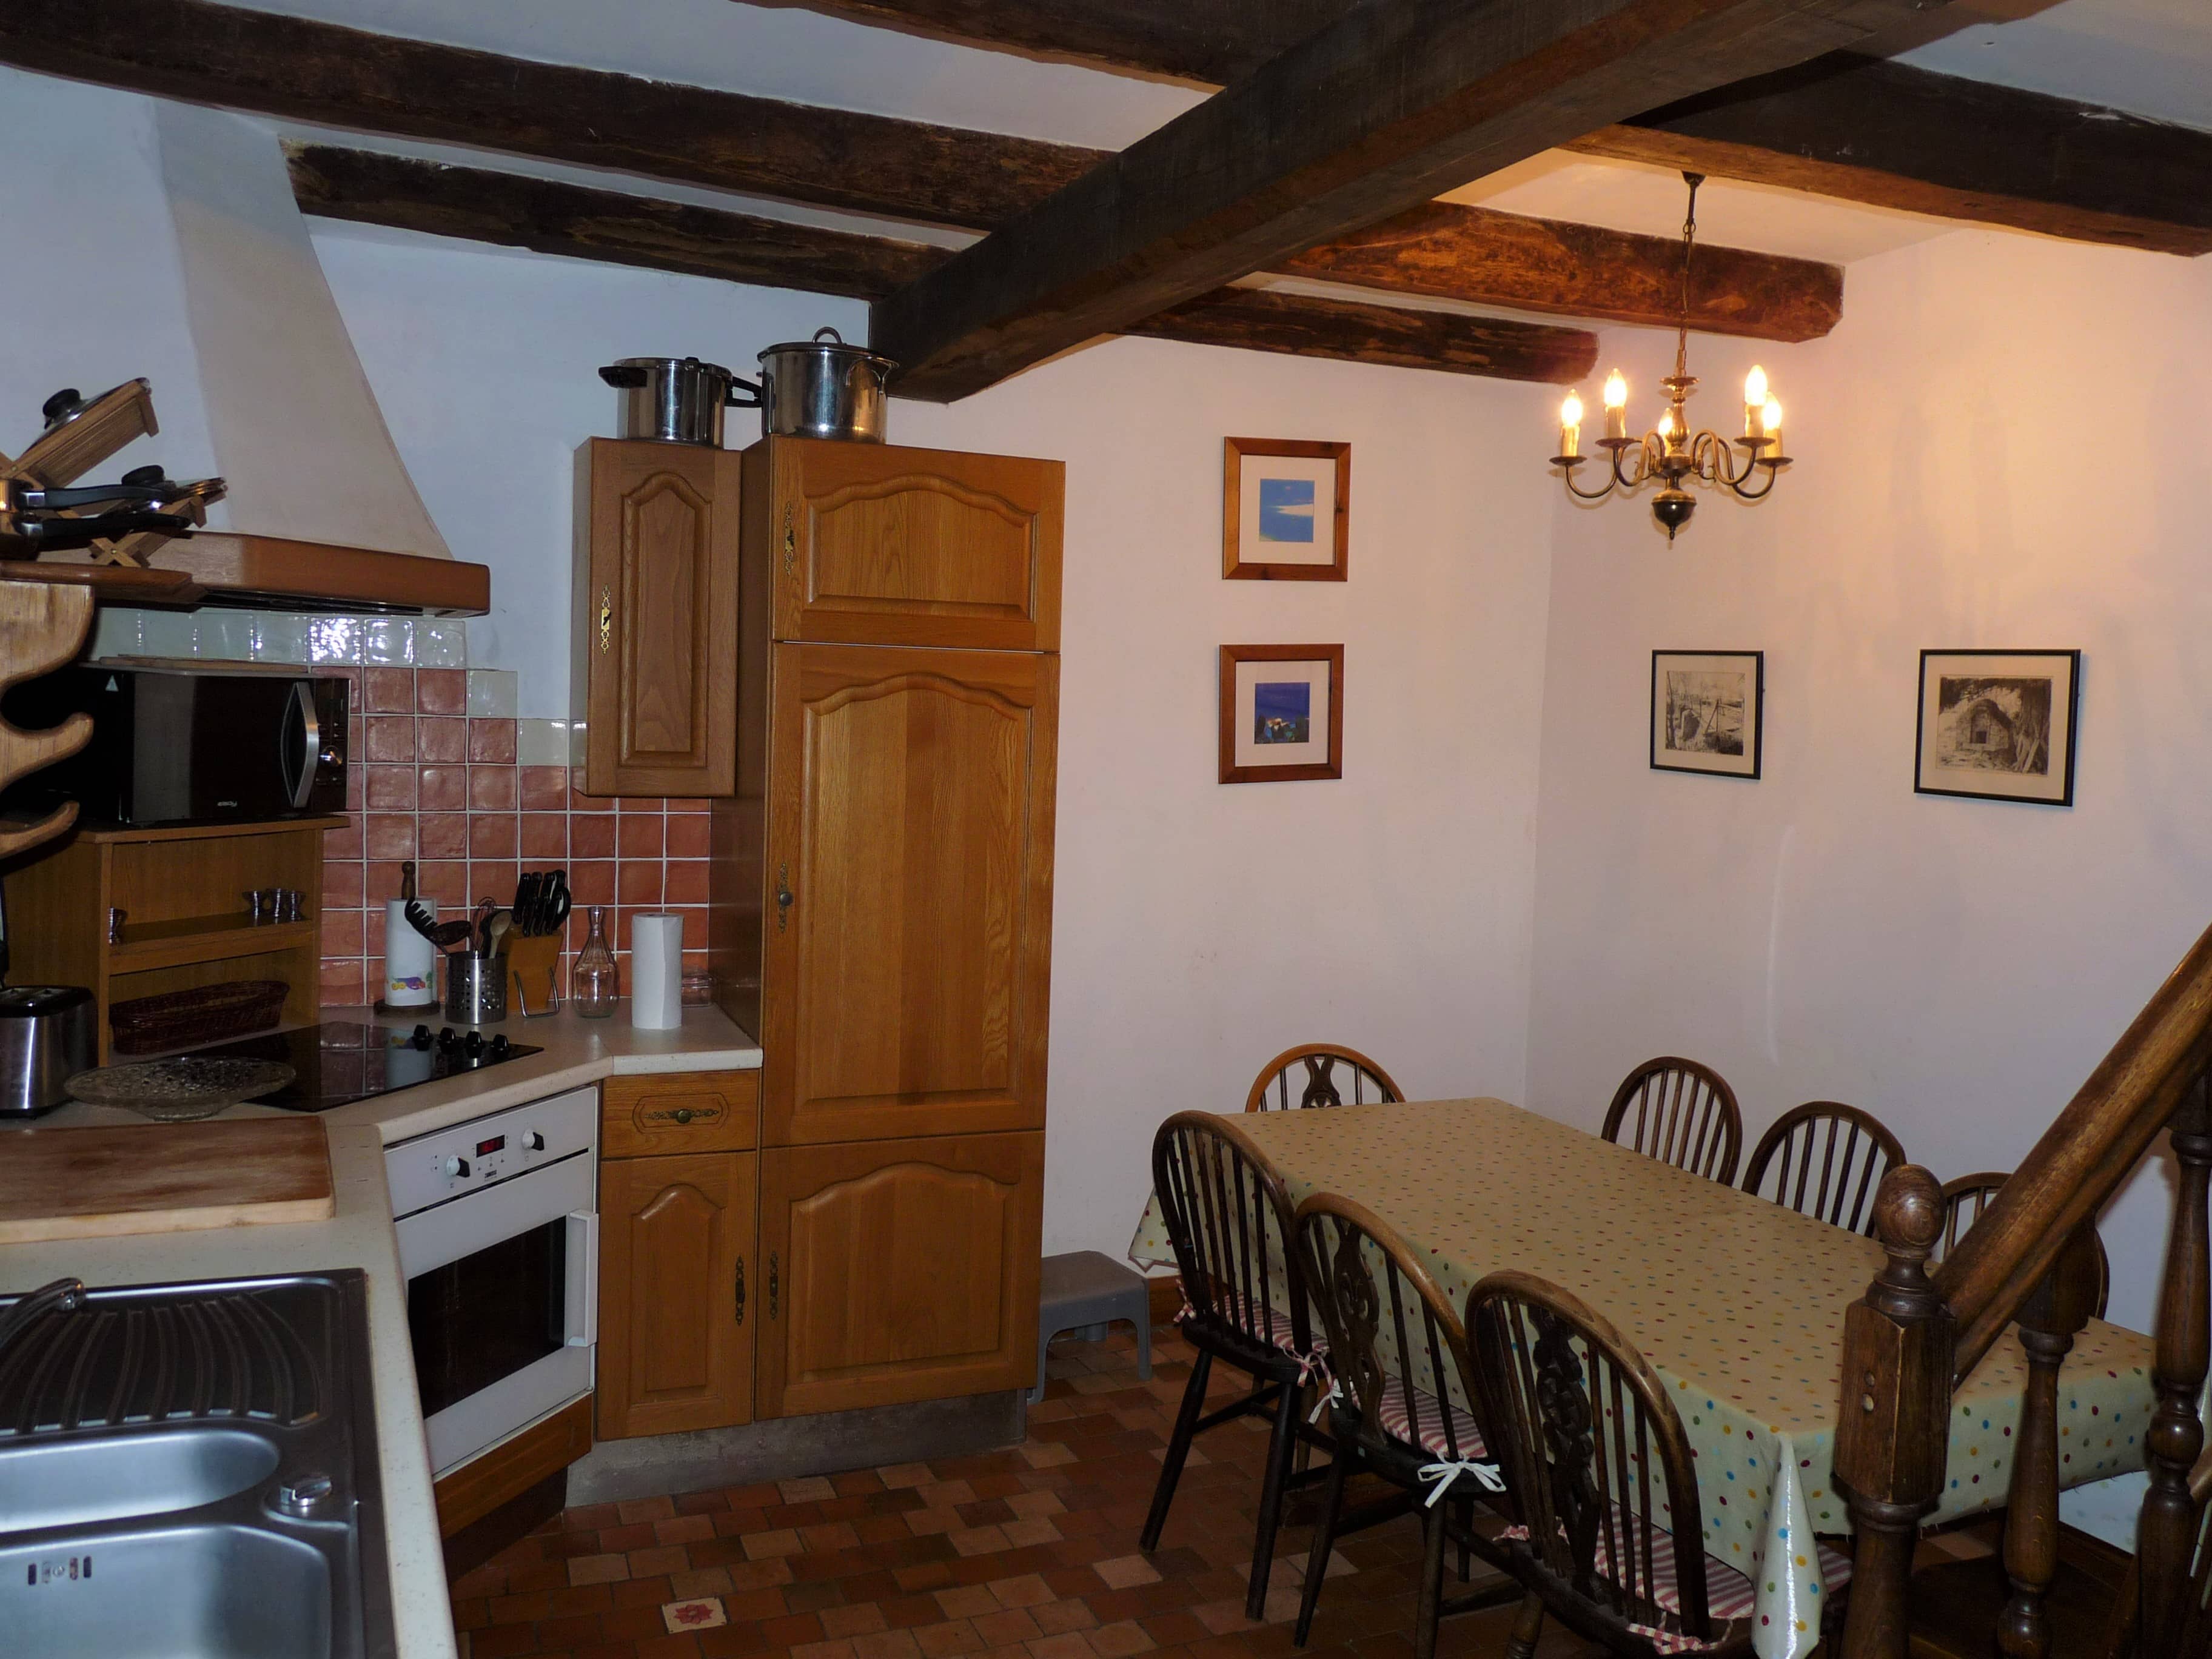 Kitchen of La Julerie cottage in Brittany, France, with a dining table, high-end appliances, and a view of the garden. Ideal for preparing holiday meals with family or friends.